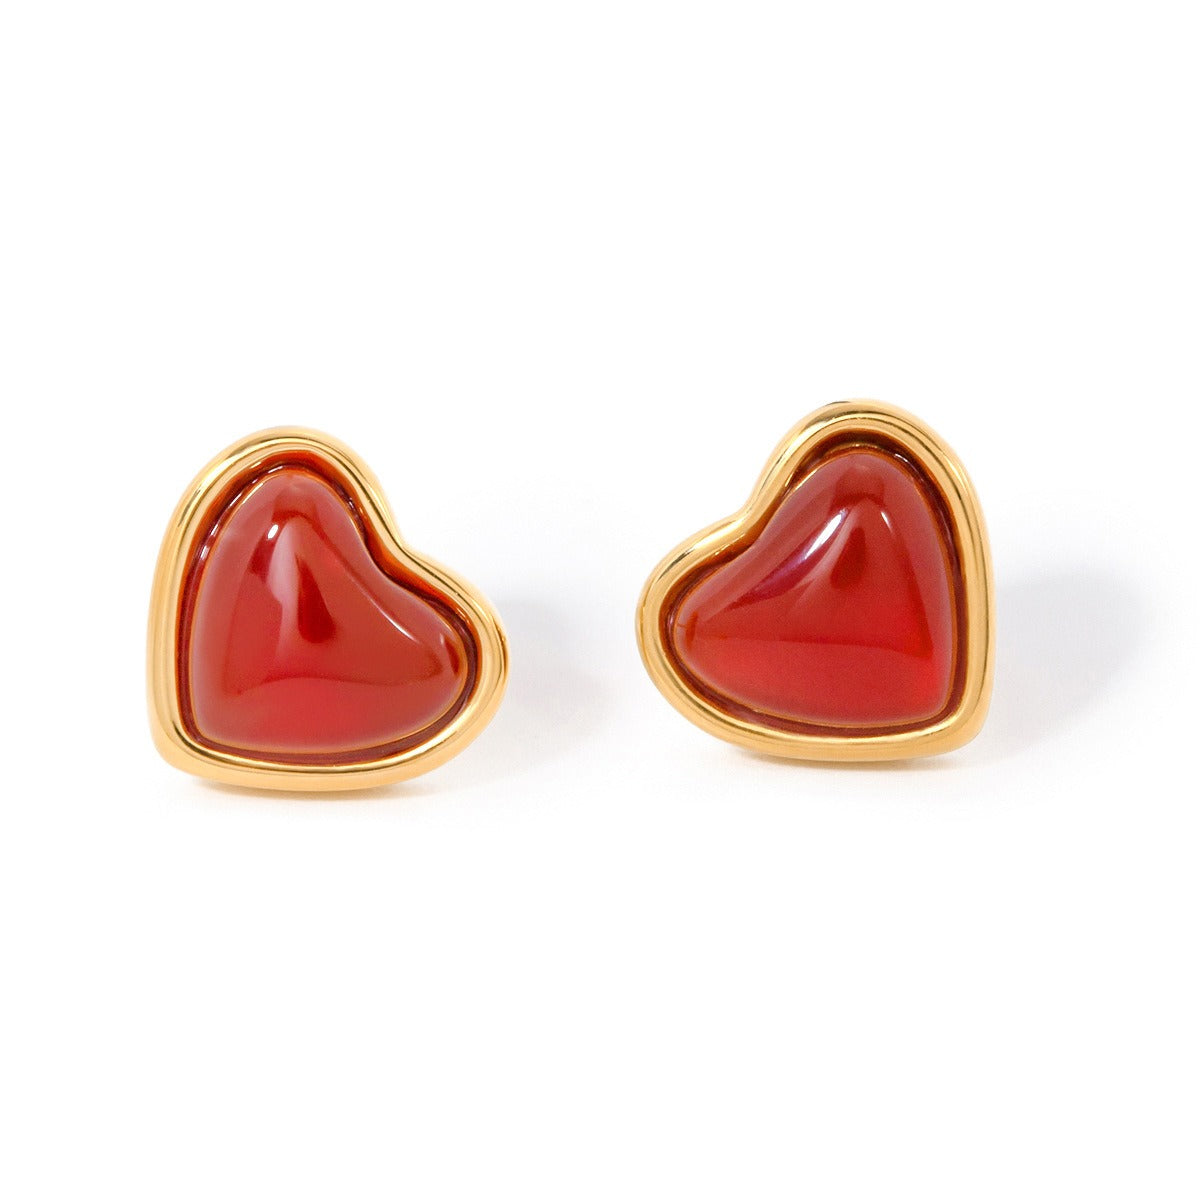 18k gold exquisite and elegant love inlaid red gemstone design earrings - SAOROPHO